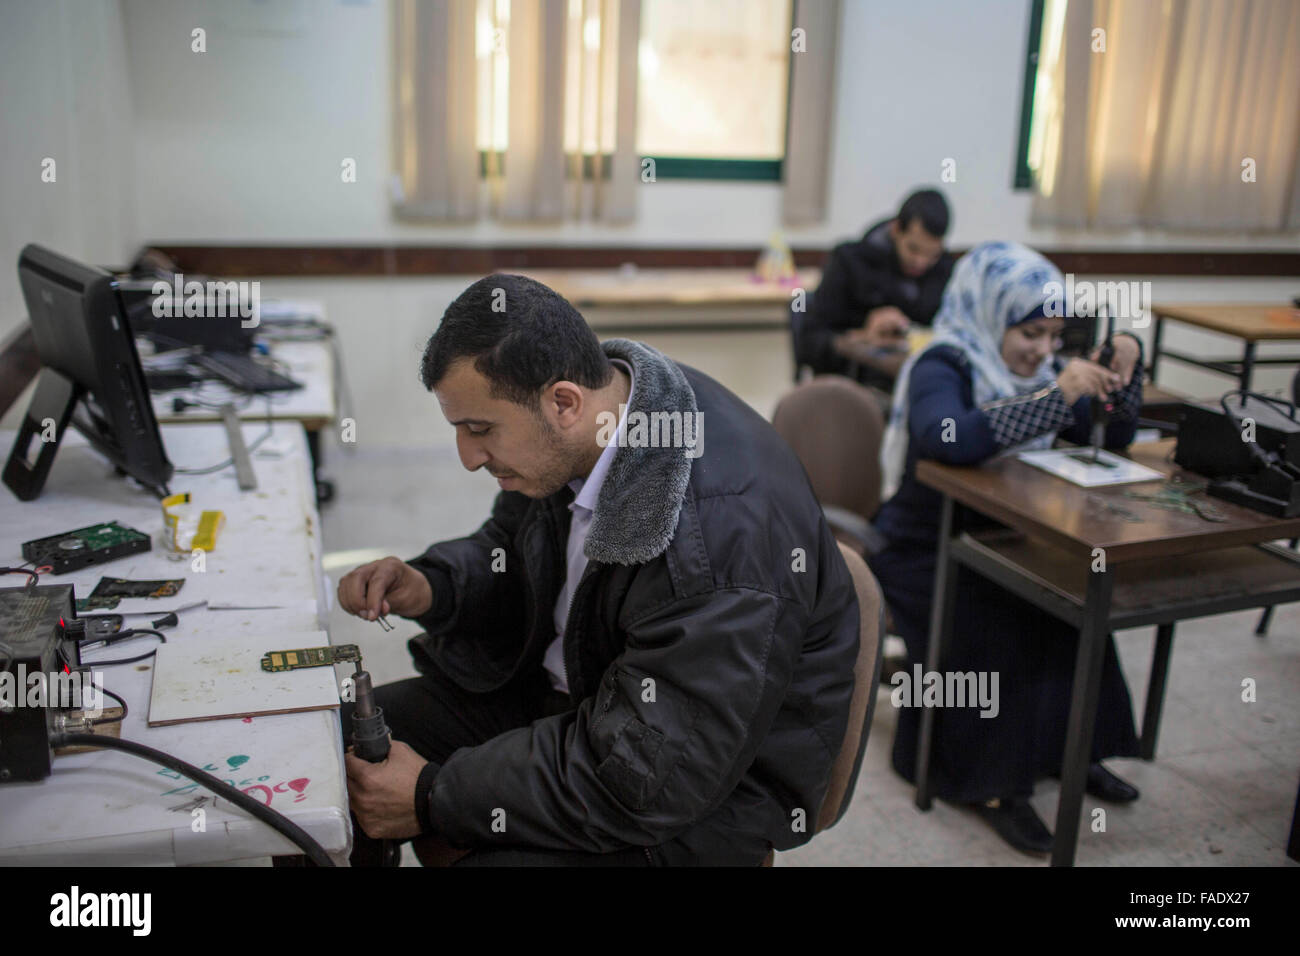 Gaza, Gaza City. 28th Dec, 2015. Disabled people work at the training center of the Irada Institution, in Gaza City, on Dec. 28, 2015. The center provides disabled people with 3-6 months of vocational training and temporary job opportunities so they can better cope with hardships in life. Credit:  Wissam Nassar/Xinhua/Alamy Live News Stock Photo